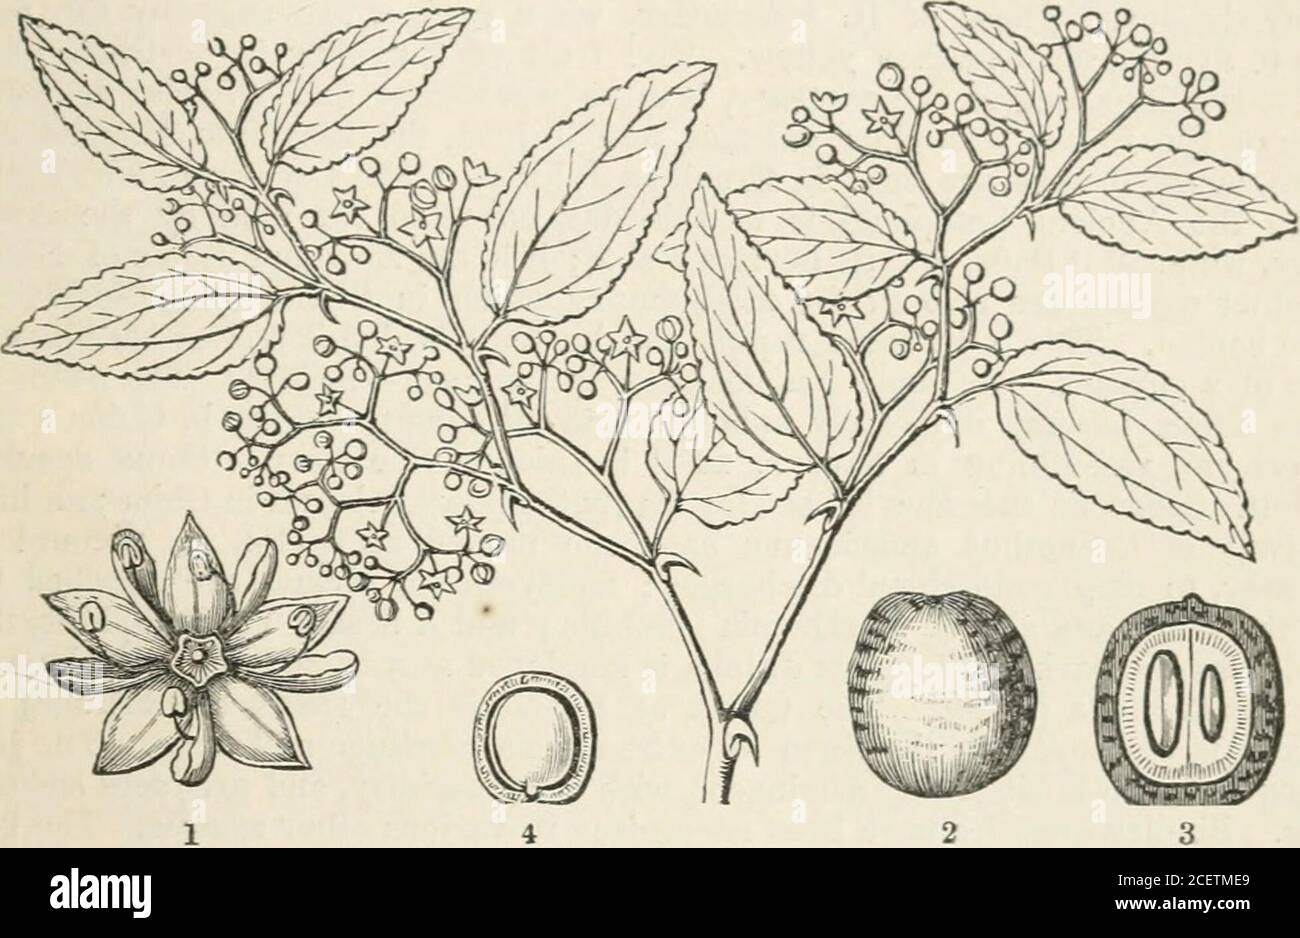 . The vegetable kingdom : or, The structure, classification, and uses of plants, illustrated upon the natural system. mmers. Solenostigma, Endl.Mertensia, H. B. K.? Bosea, Linn. Yerva-Mora, Ludw. II. Ulme^.—Ovary two-celled ; oiiles anatro-pal. Planera, Gmel. Abelicea, Hon. Belli. Zelkova, Spach.Euptelea, Zucc.Microptelea, Spach.Ulmus, Linn. Numbers. Gen. 9. Sp. 60. Urticacece.Position.—Rhamnacese.—Ulmace^.—Penseacese. TliymelacecB. Fig. CCCXCIII.—Ulmus campestris.—i^ea. 1. its flower; 2. its pistil; 3. its fruit; 4. its embryo. Rhamnales.] RHAMNACE^. 581 Order CCXXII. RHAMNACE^.—Rhamnads. Rh Stock Photo